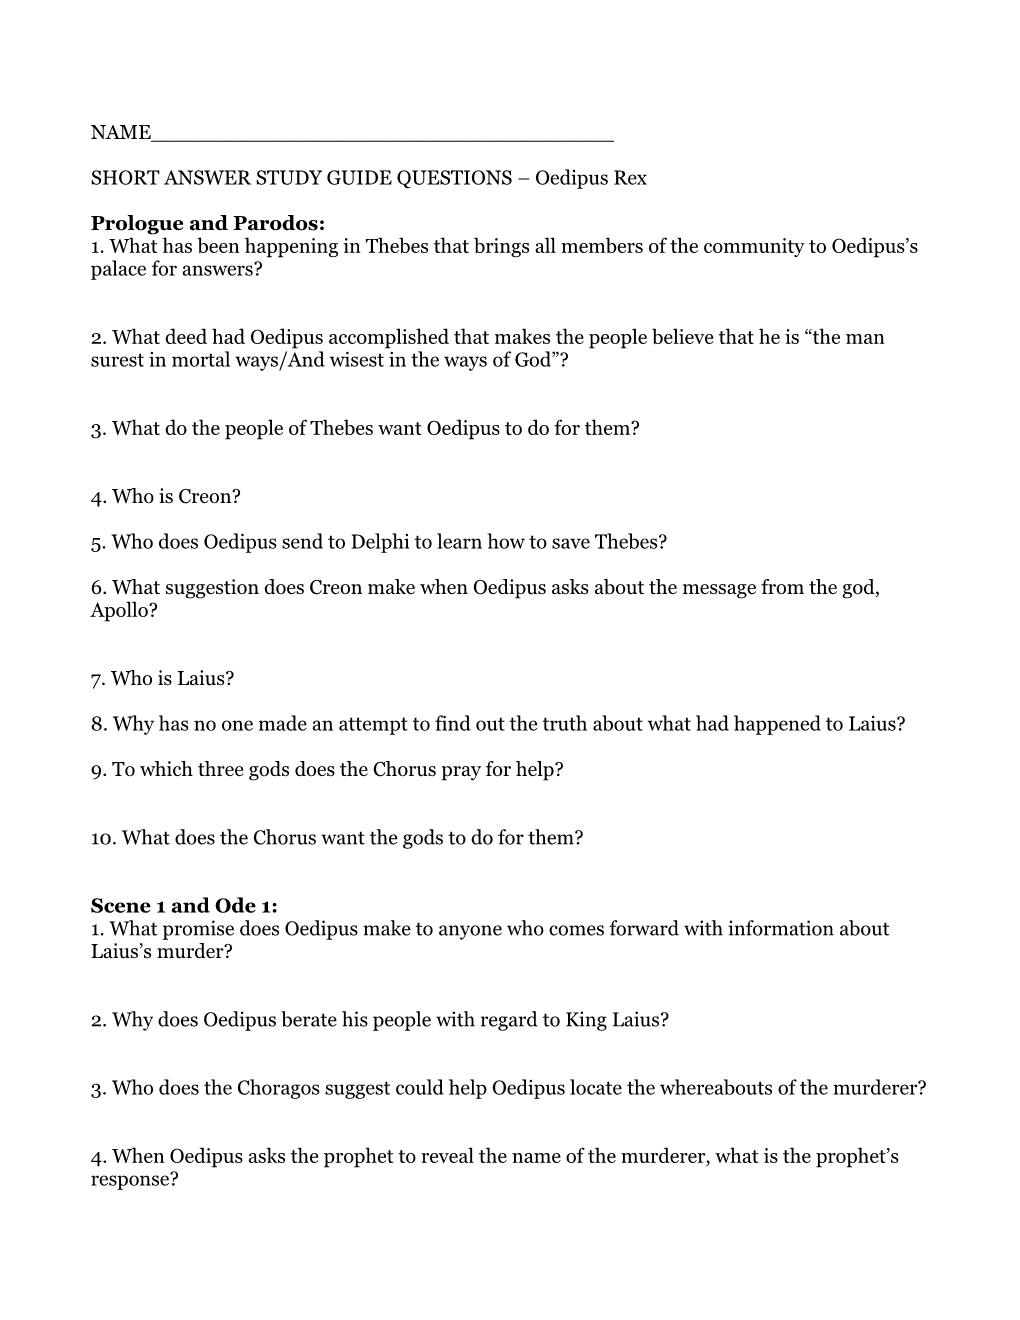 SHORT ANSWER STUDY GUIDE QUESTIONS Oedipus Rex